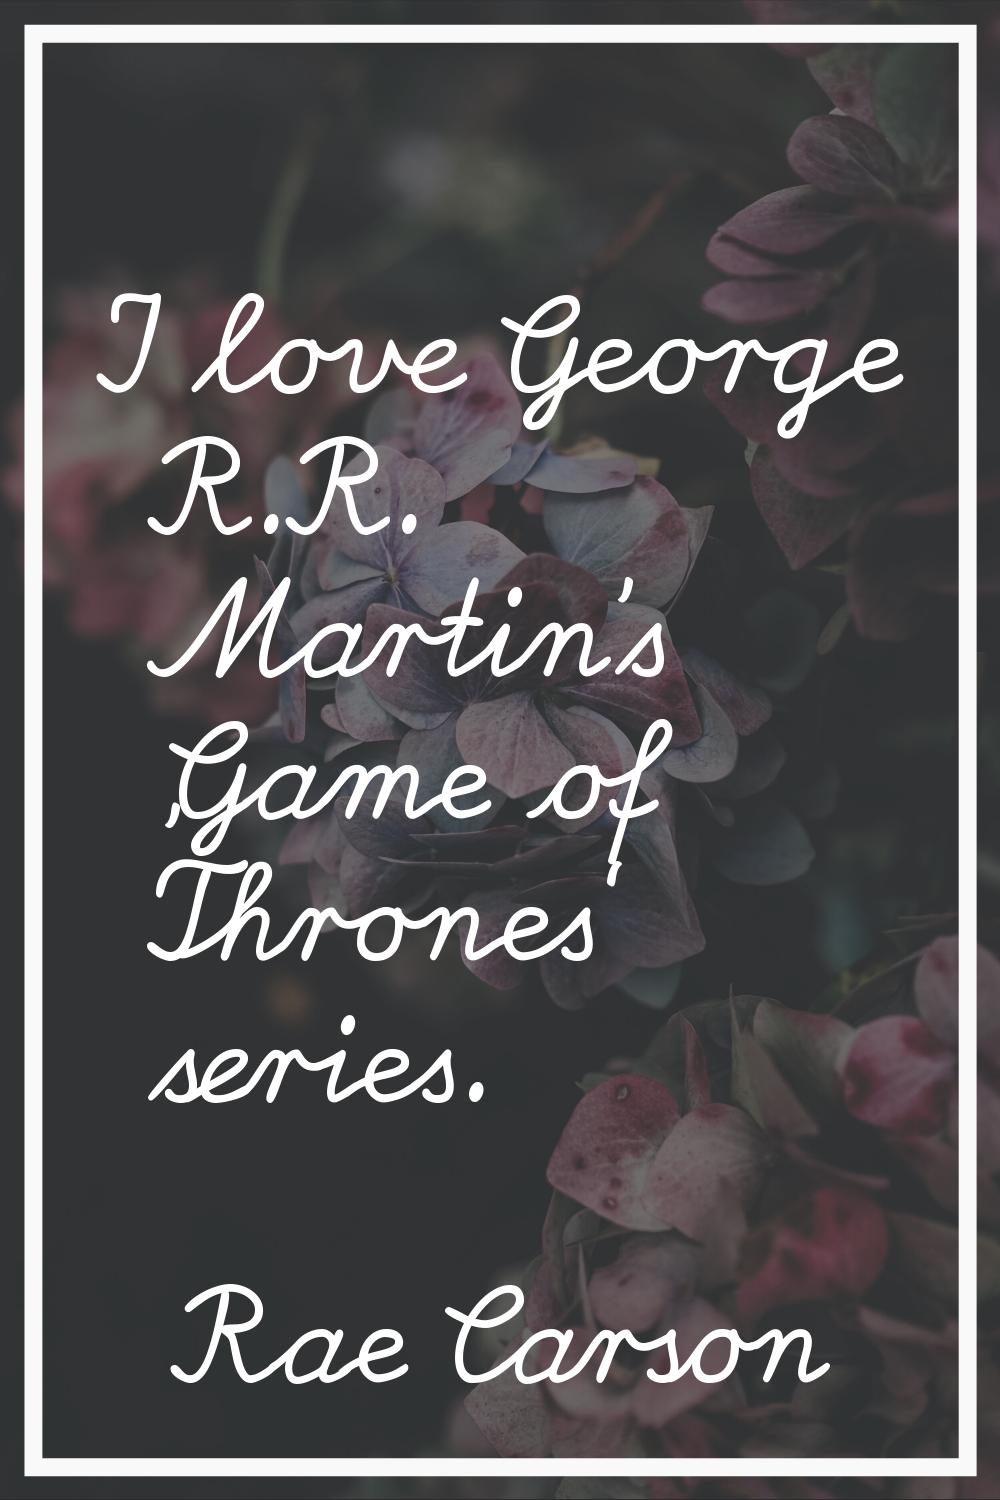 I love George R.R. Martin's 'Game of Thrones' series.